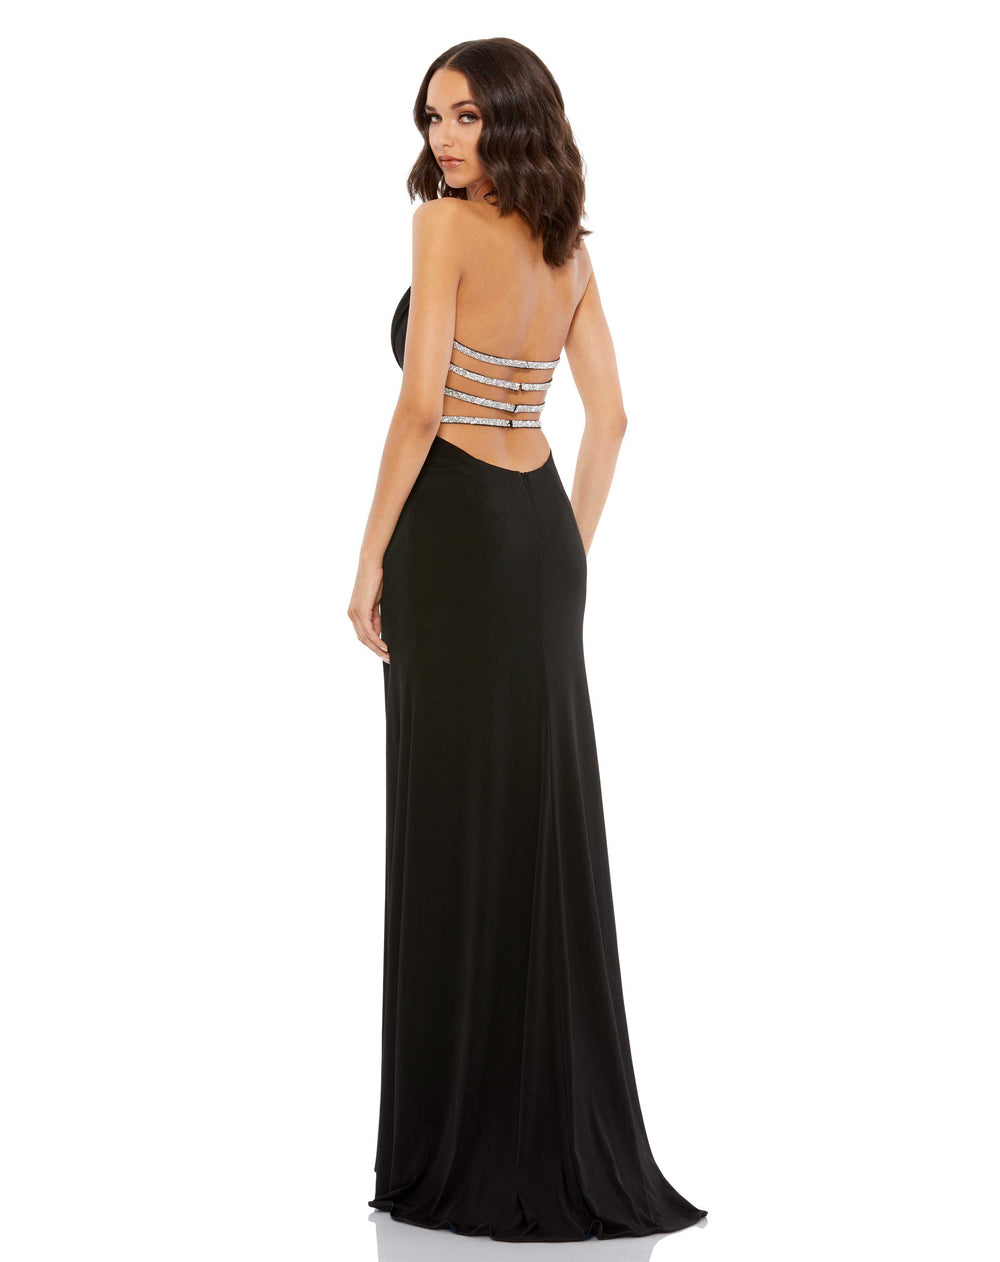 Cowl Neck Halter Strap Low Back Gown – Mac Duggal